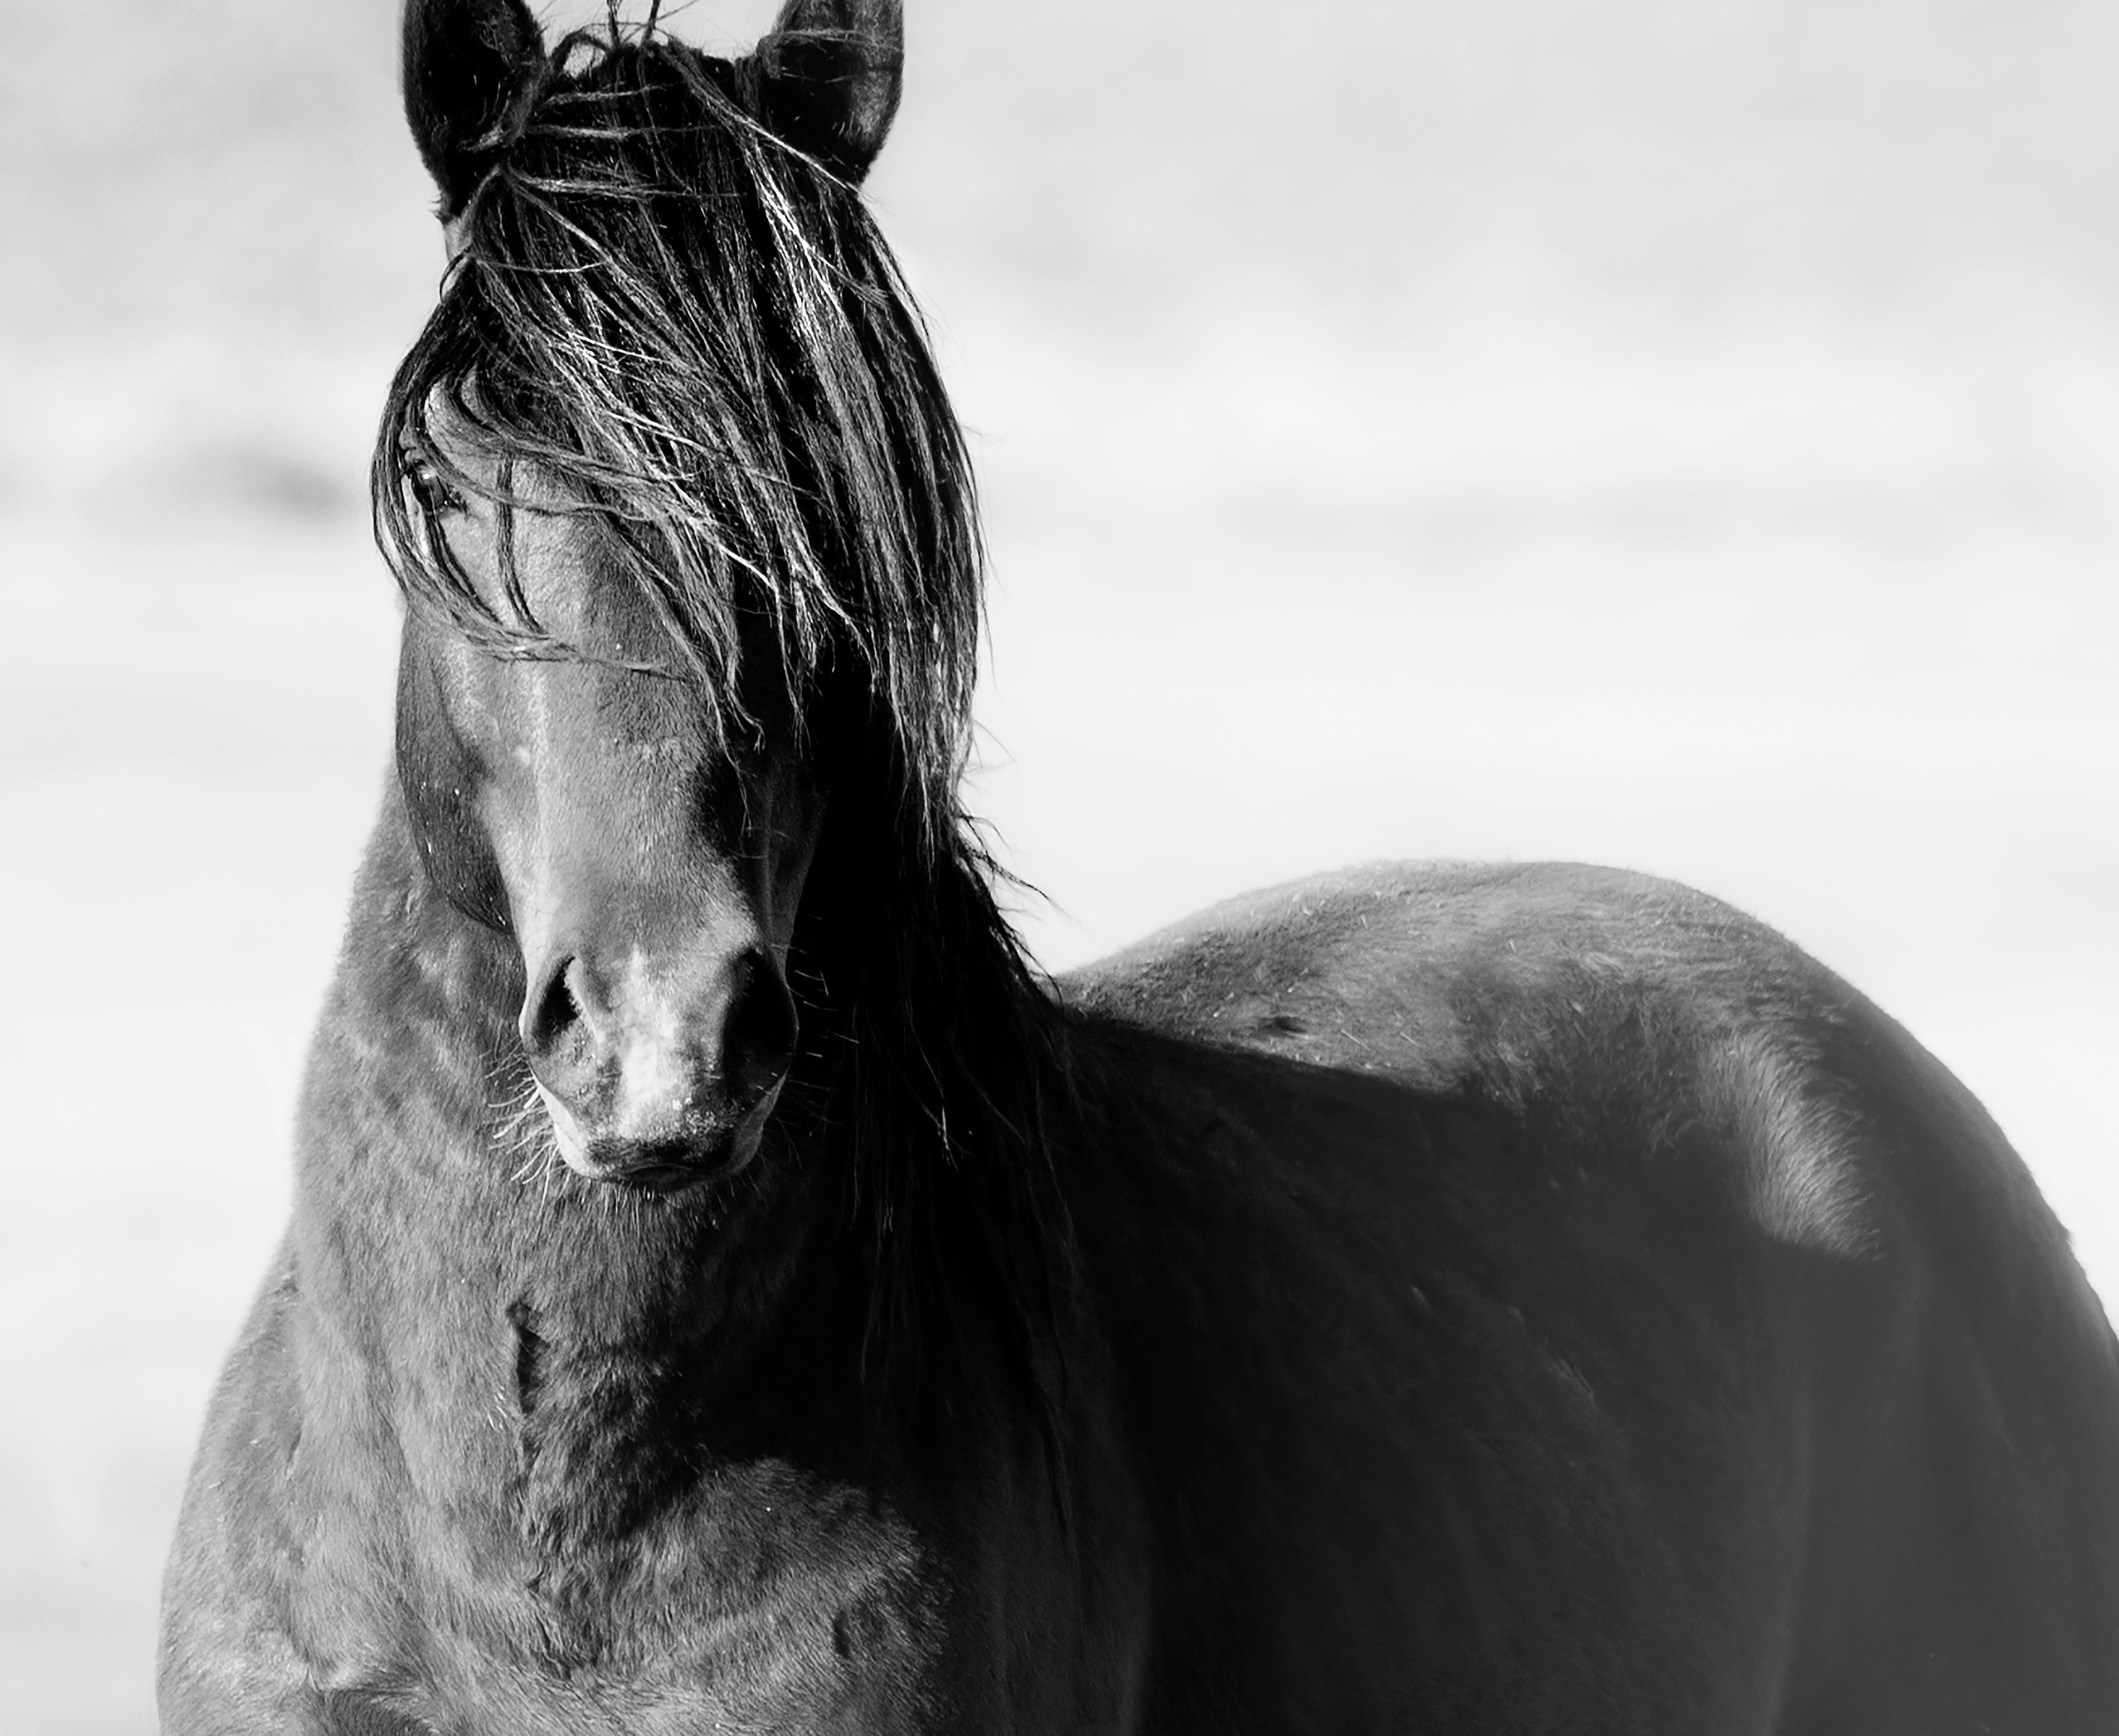 Shane Russeck Animal Print - Black and White Photography of Wild Horse Mustang "Wild" 36x48 Unsigned Fine Art